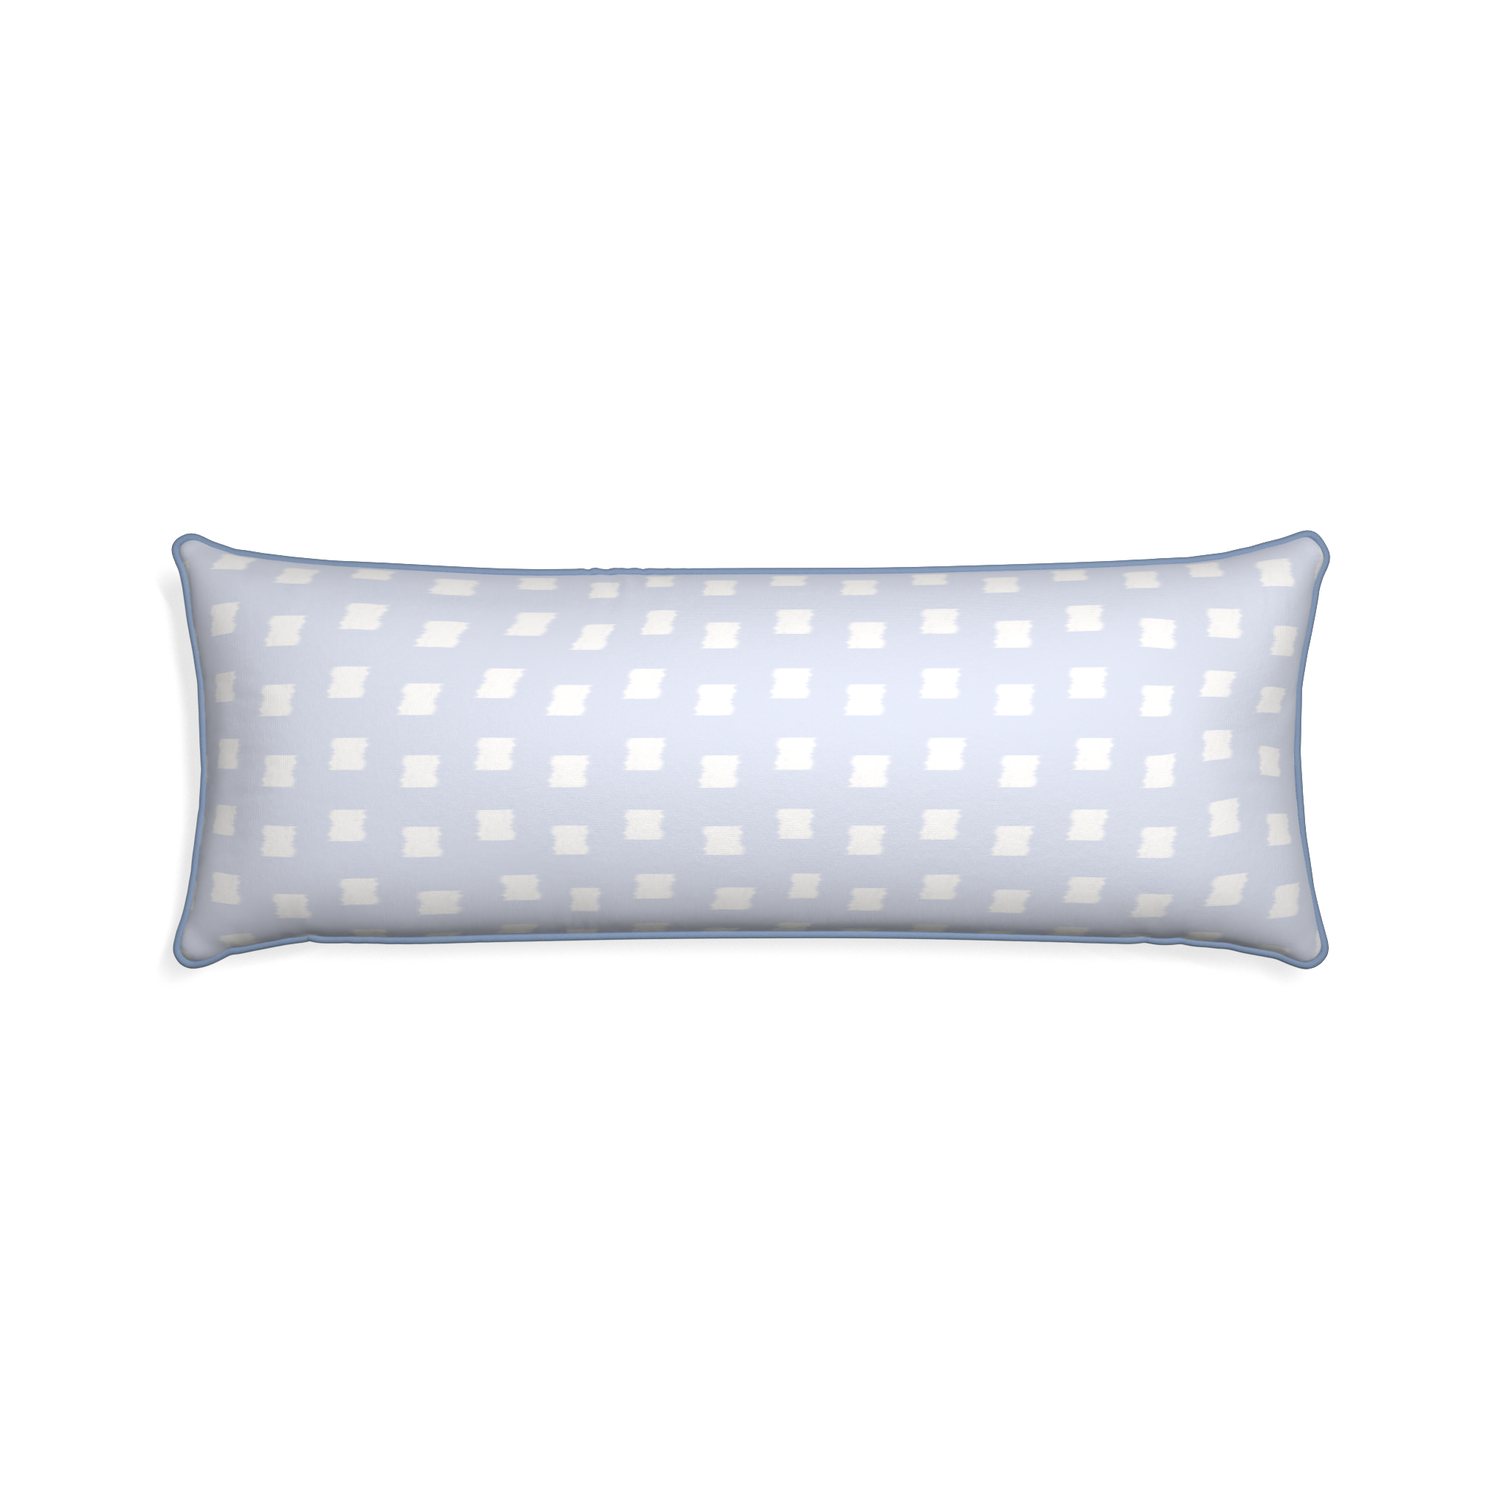 Xl-lumbar denton custom sky blue patternpillow with sky piping on white background